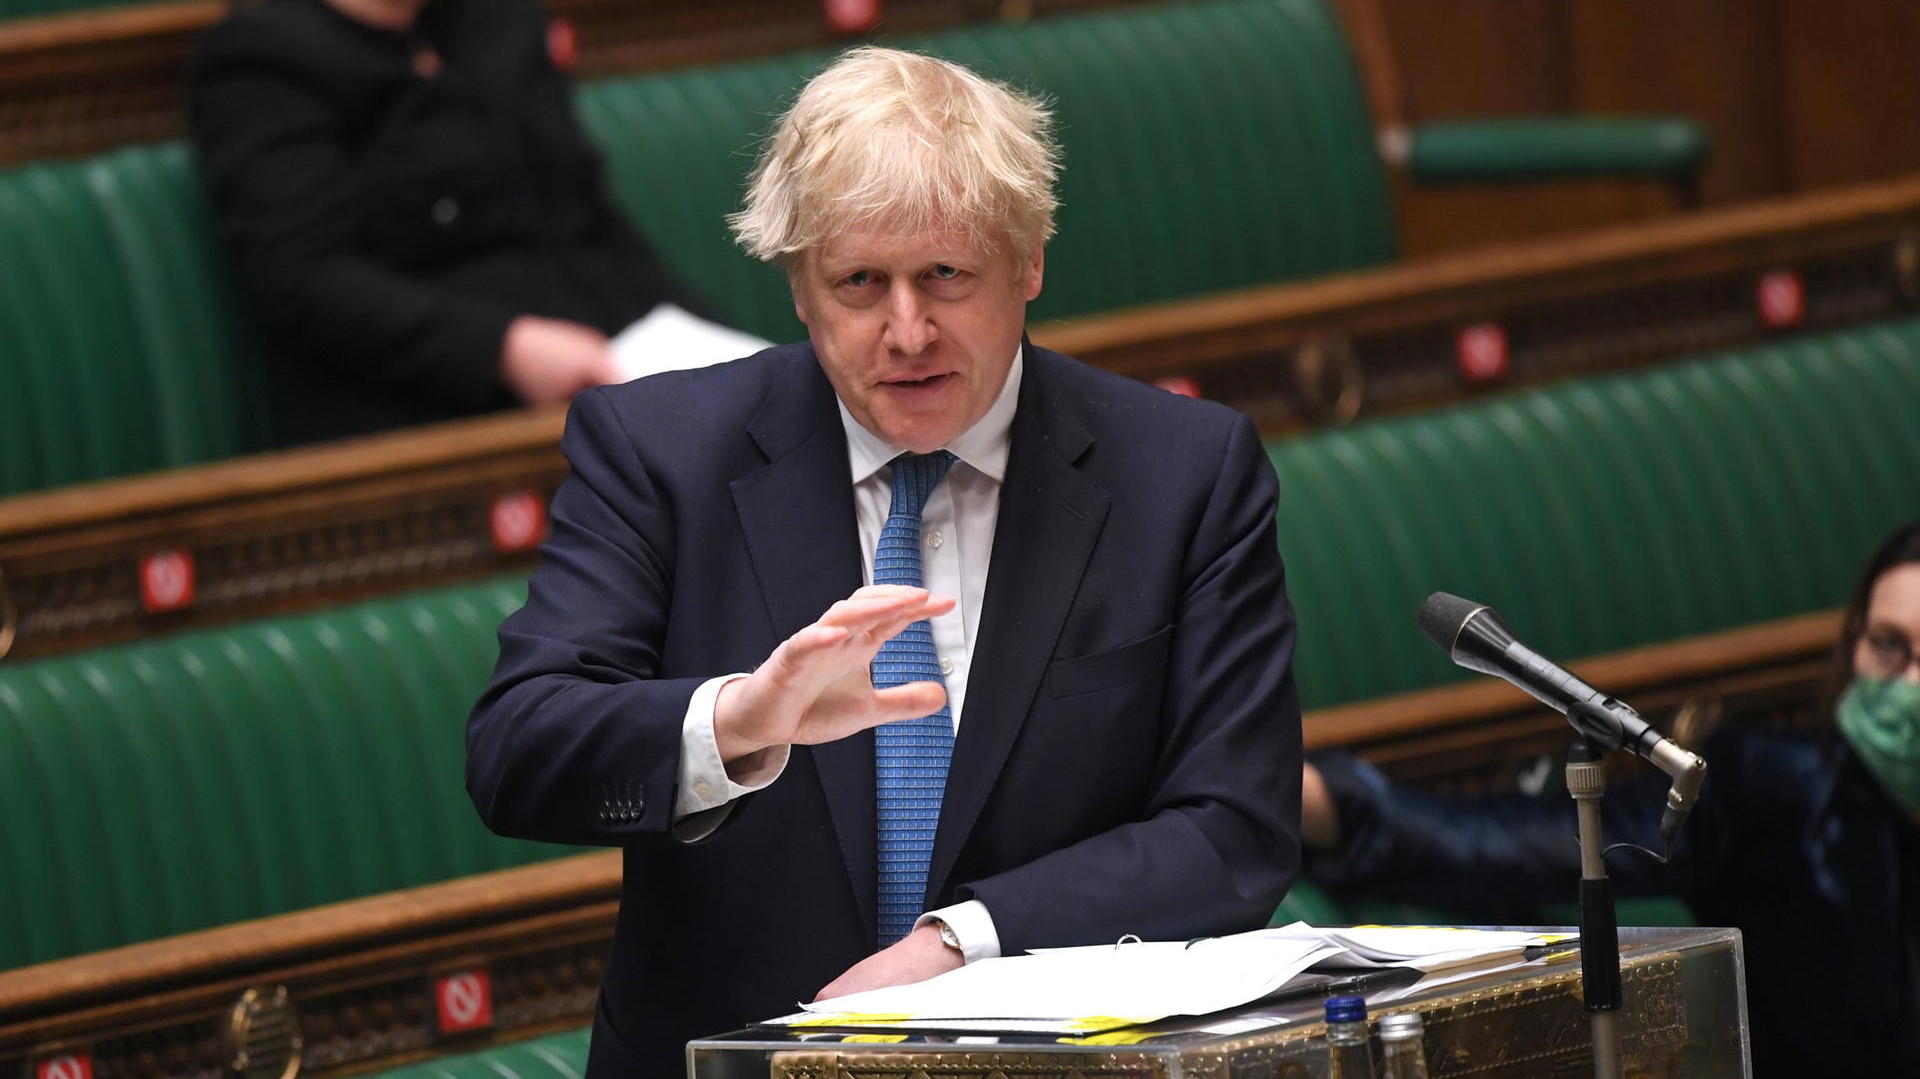 The order to pay against Boris Johnson has been dropped